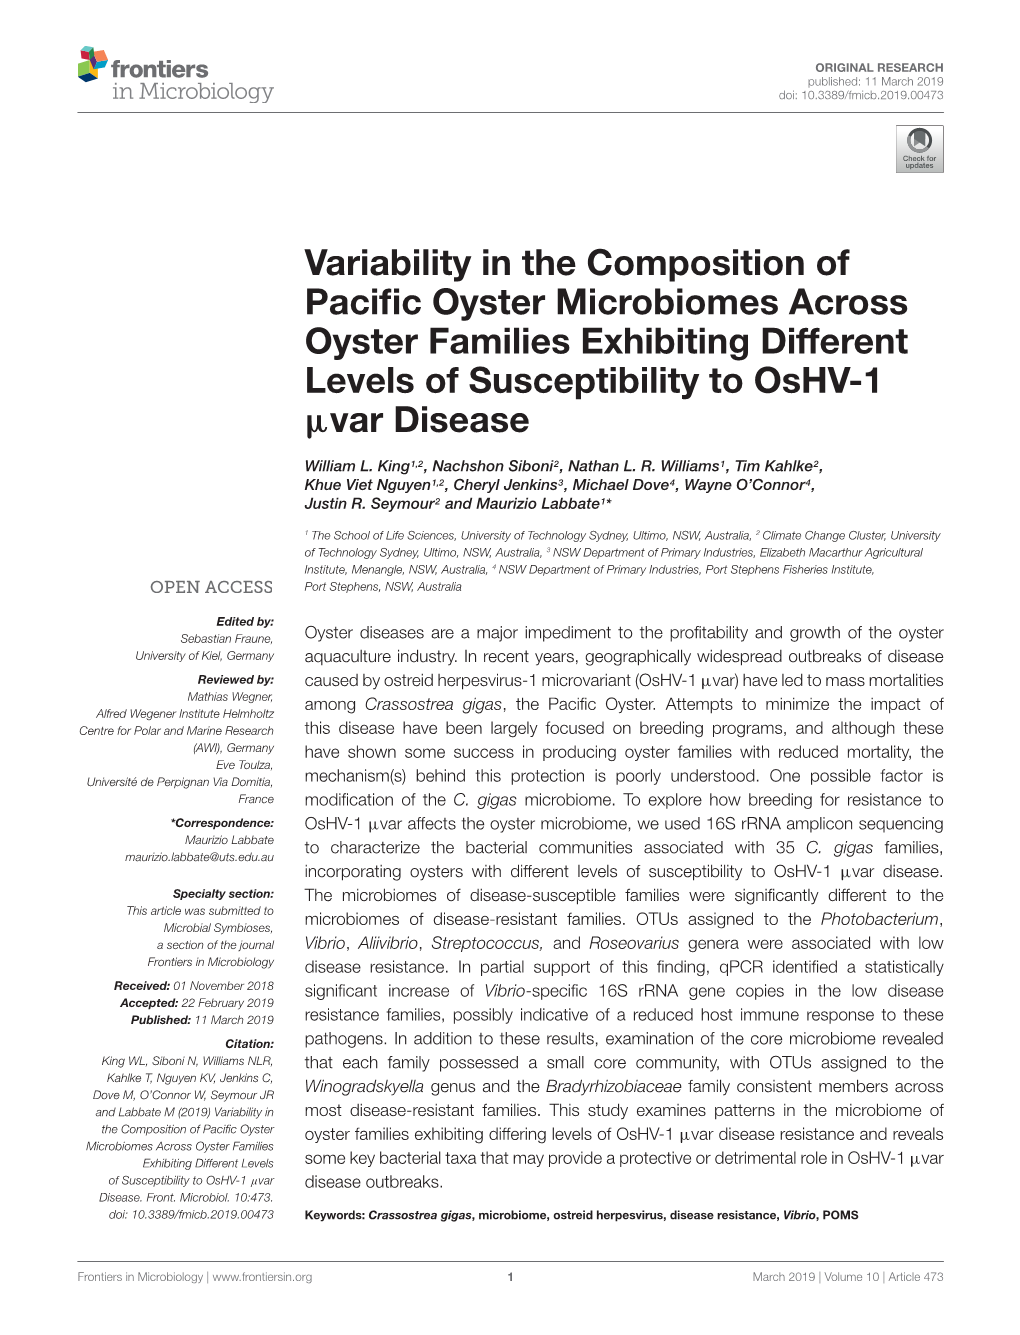 Variability in the Composition of Pacific Oyster Microbiomes Across